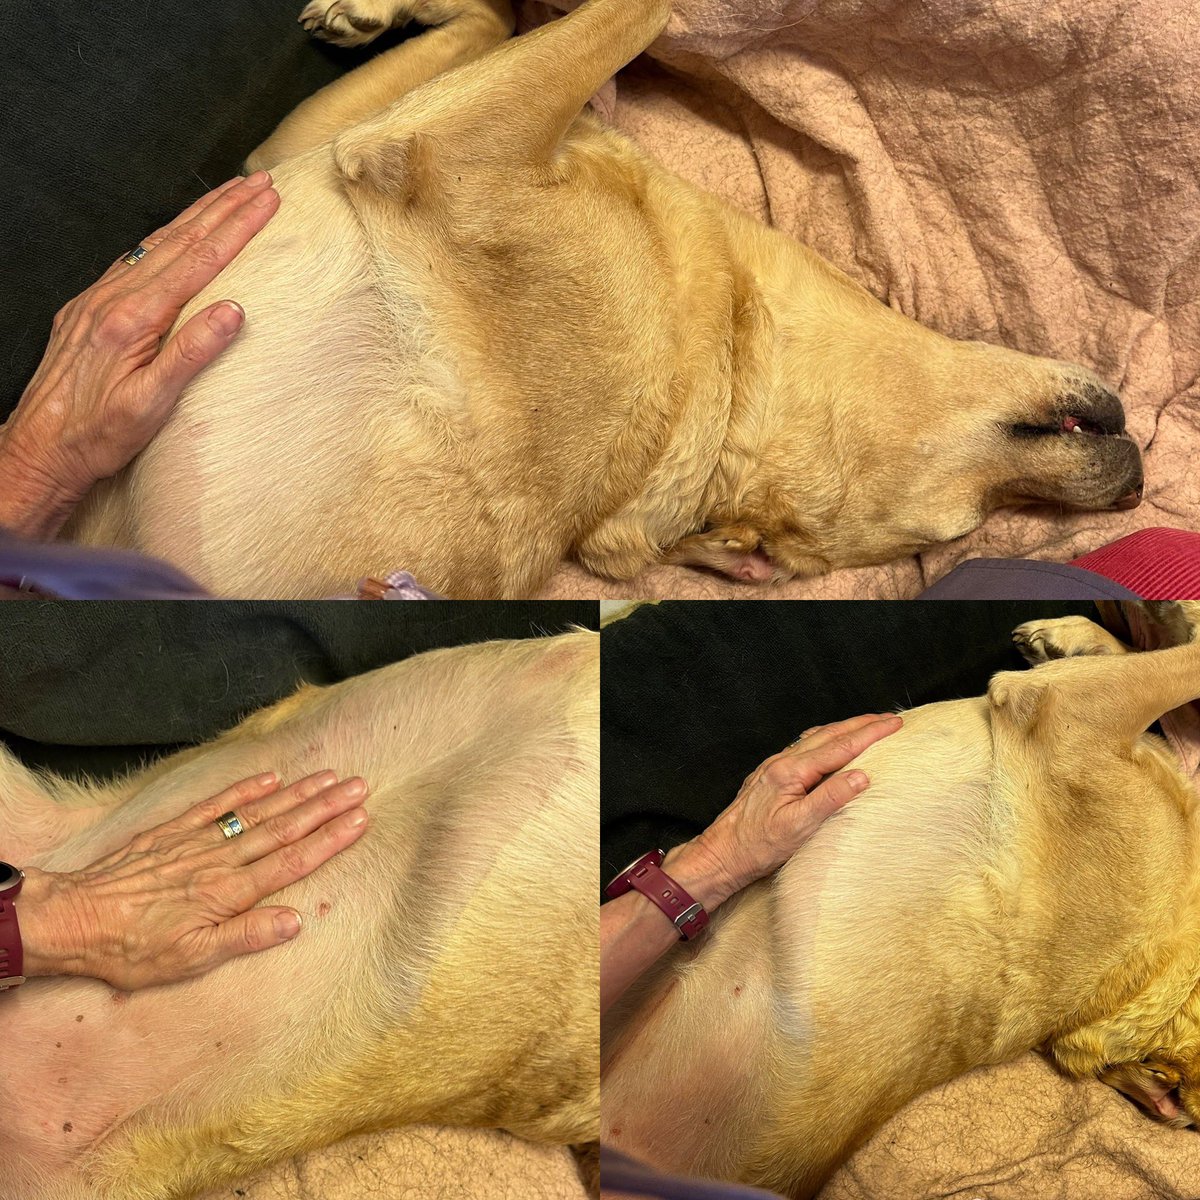 🙏🏻❤️🐾 So thrilled that Ruby accepted physical Reiki for half an hour yesterday afternoon; that's a breakthrough. I am still giving her distance, too. 🐾❤️🙏🏻 #reiki #reikipractitioner #reikiforanimals #healing #healingjourney #labrador #labradorretriever #love #support #family